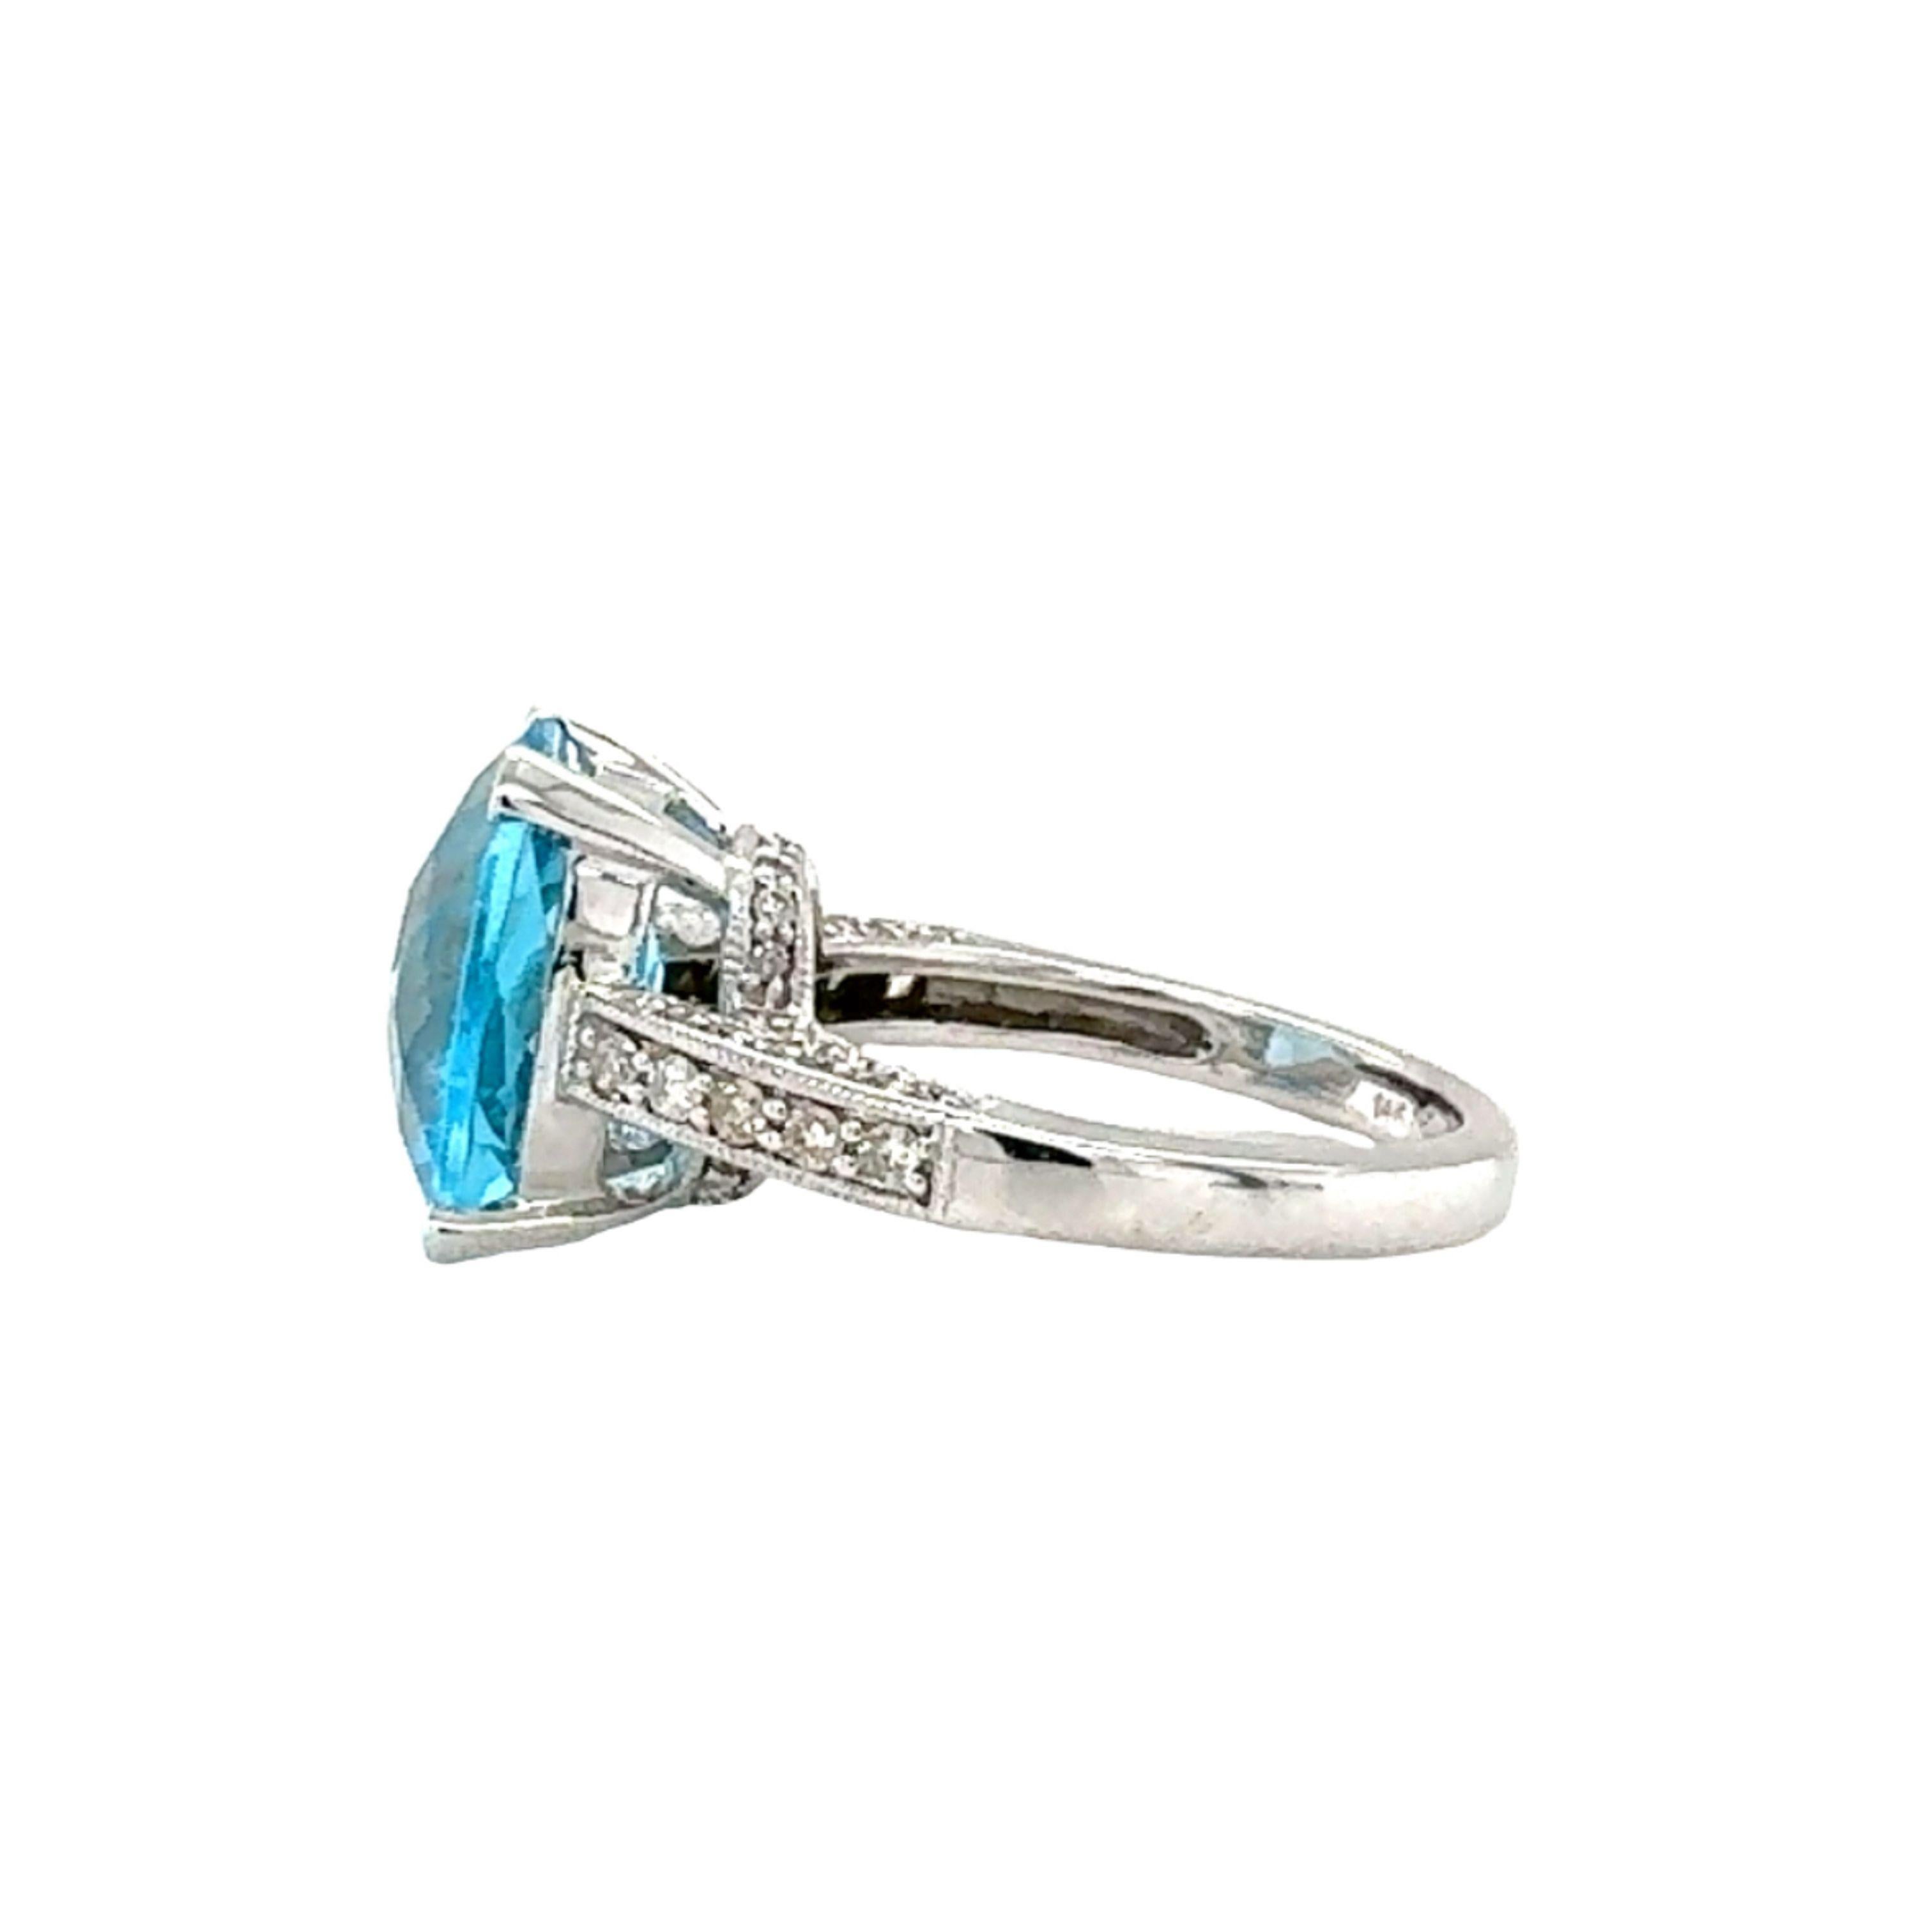 One blue topaz and diamond ring in 14K white gold centering one prong set, oval / cushion cut topaz weighing 6.74 ct.  Further accented by 60 pave set, round brilliant cut diamonds with a stated total weight of 0.46 ct. with H-I color and SI-1